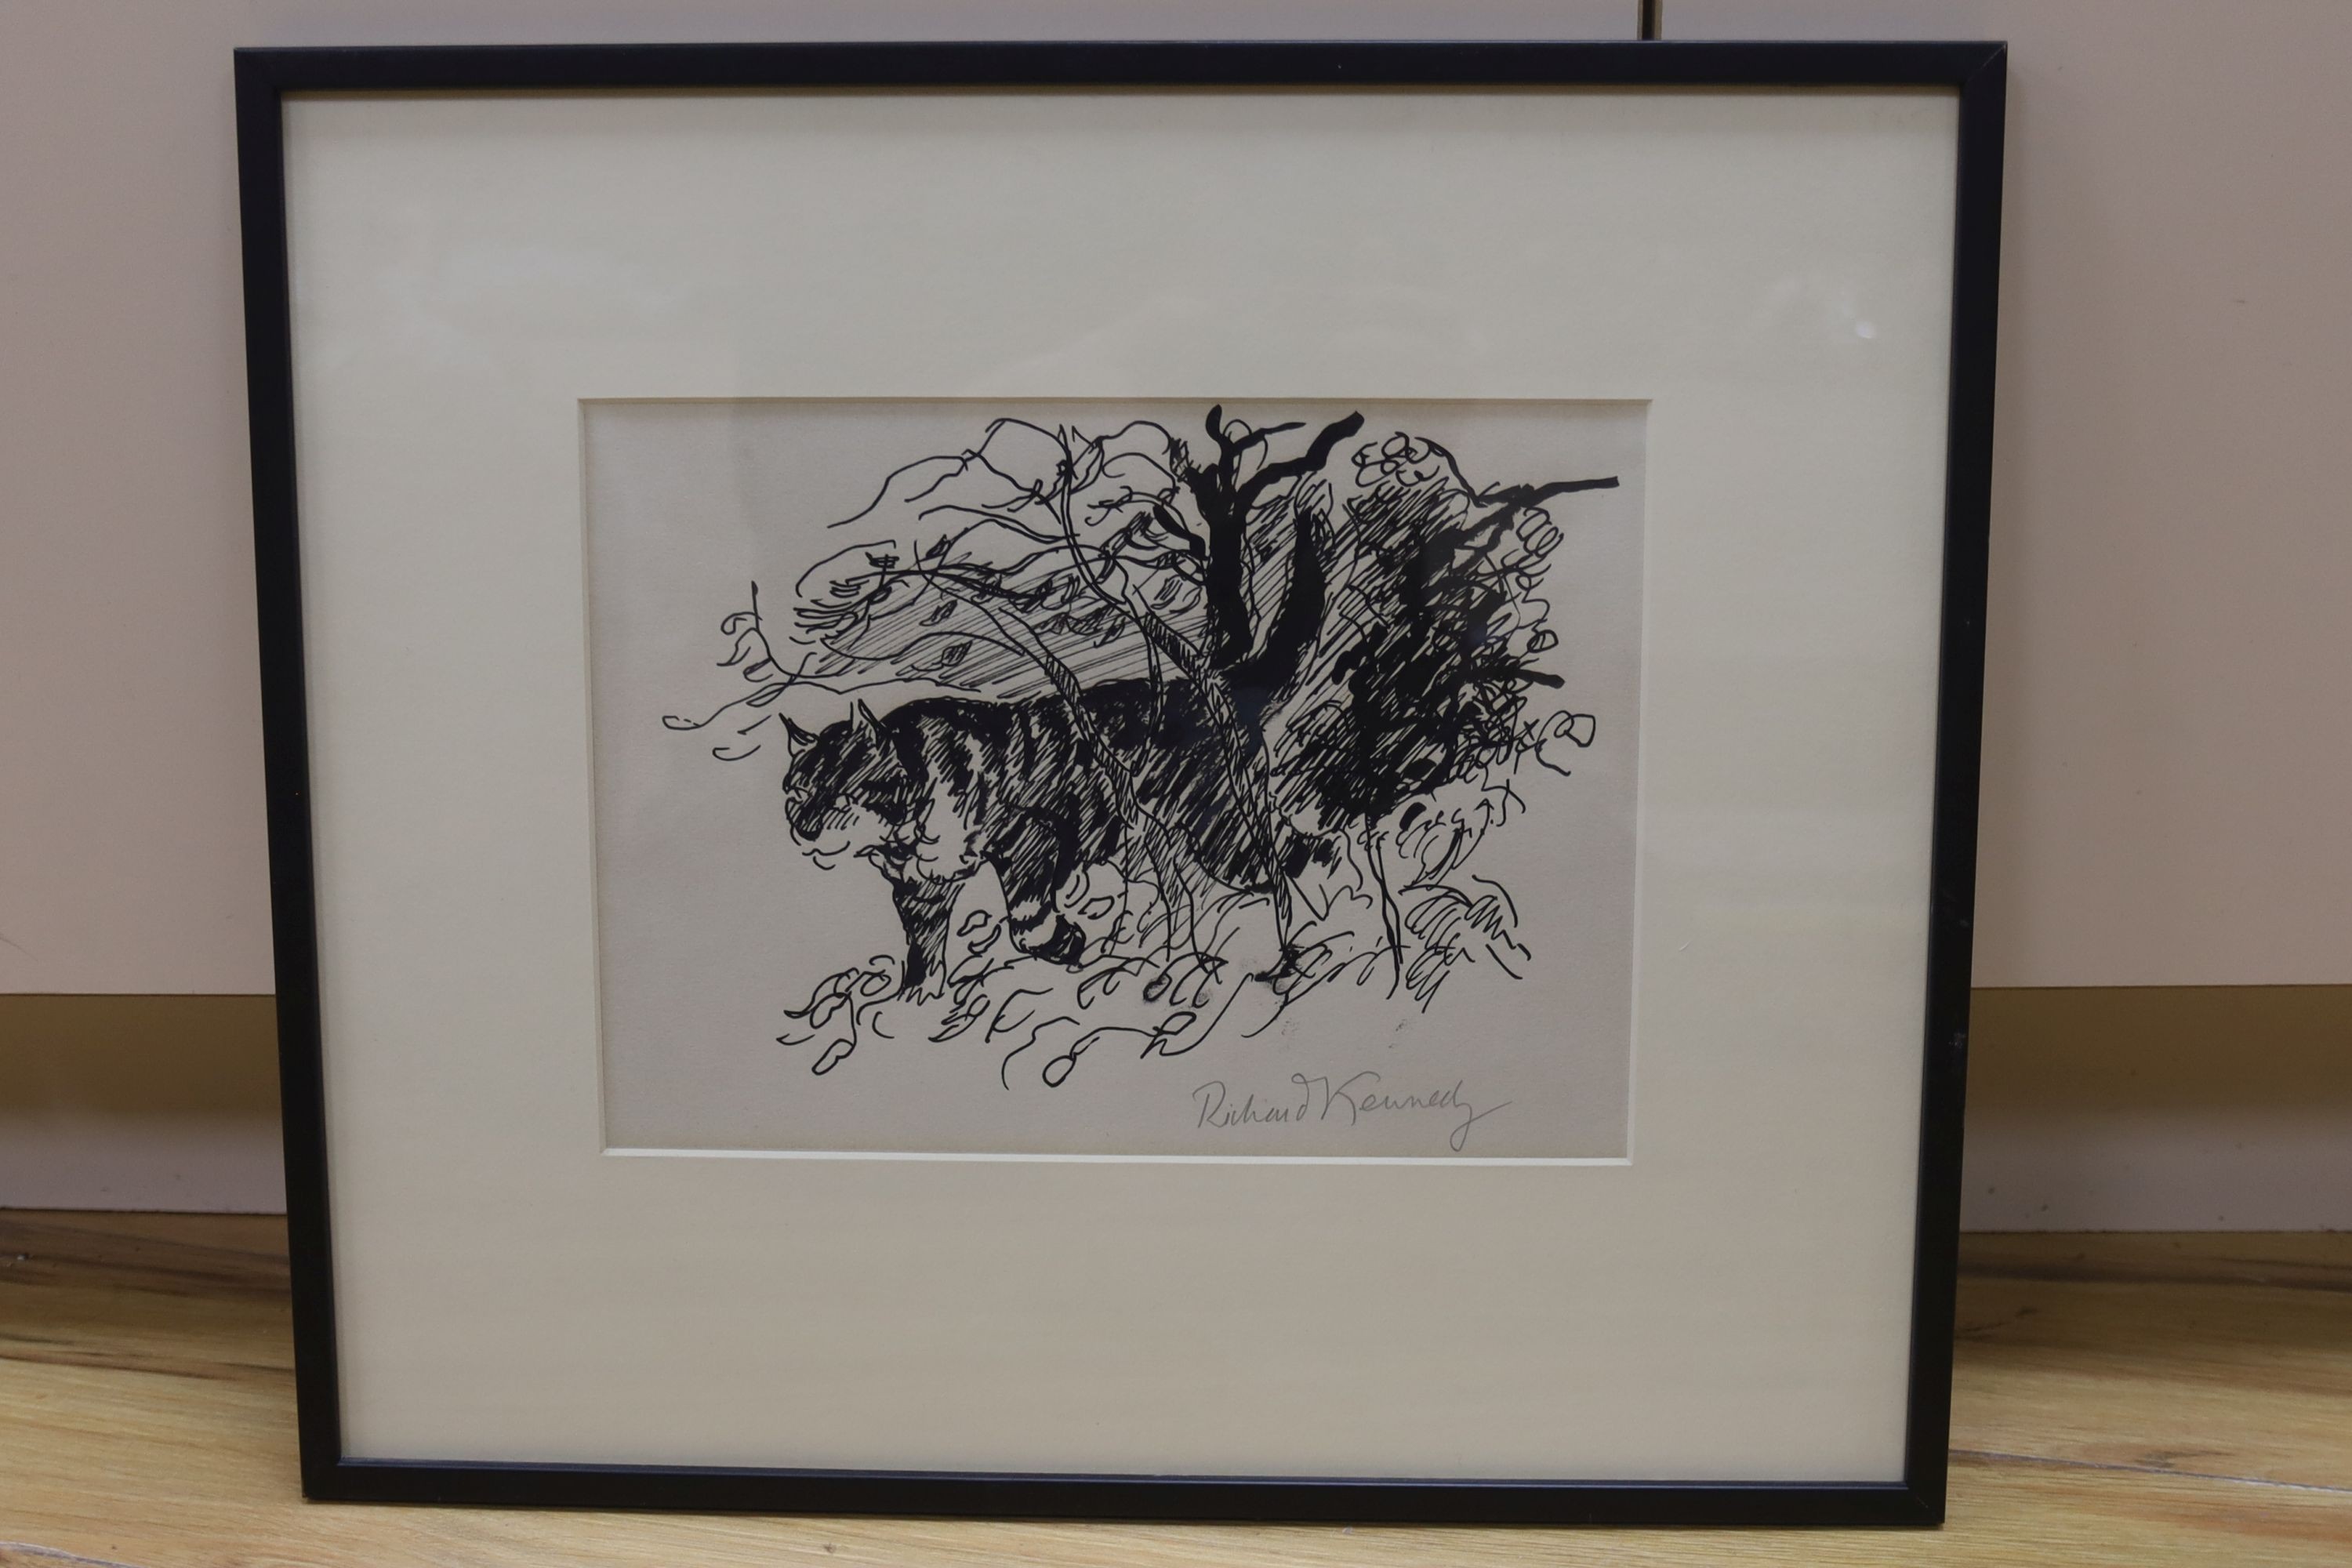 Richard Kennedy (1910-1989), pen and ink, 'Cat amongst the bushes', signed in pencil, 18 x 26cm